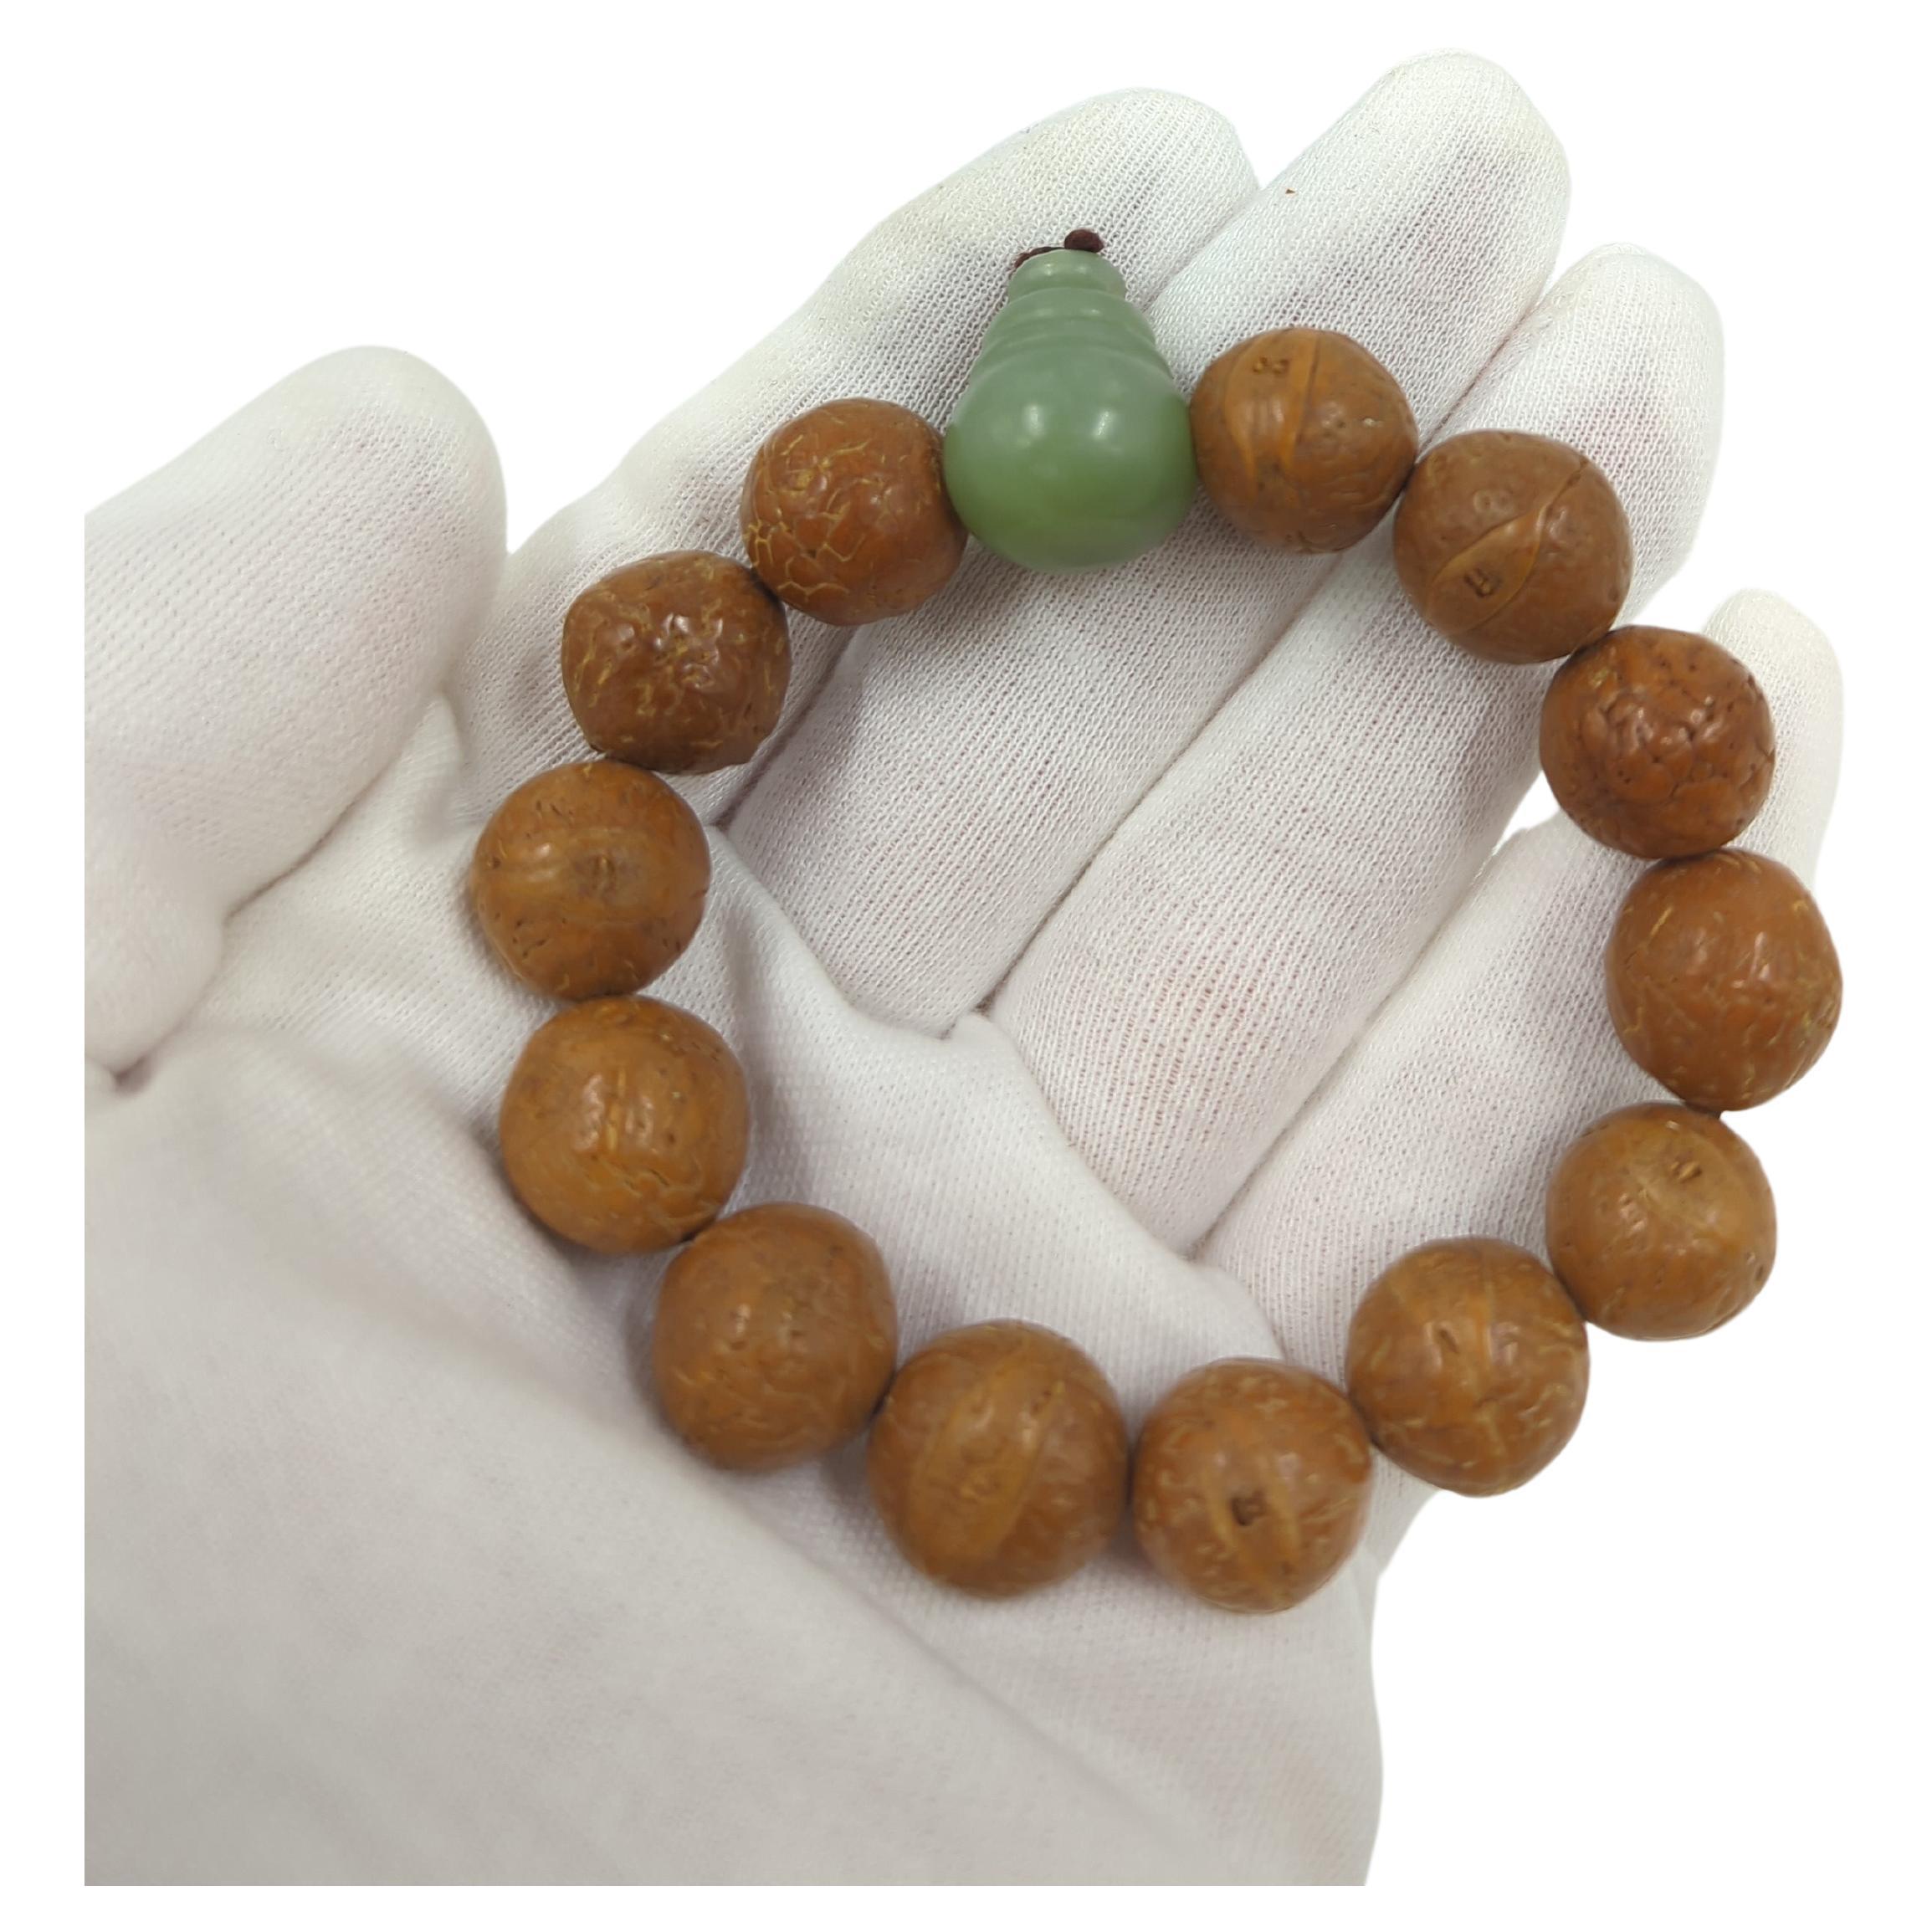 This vintage Chinese bracelet is a unique blend of cultural heritage and natural beauty, featuring Bodhi seeds, also known as 